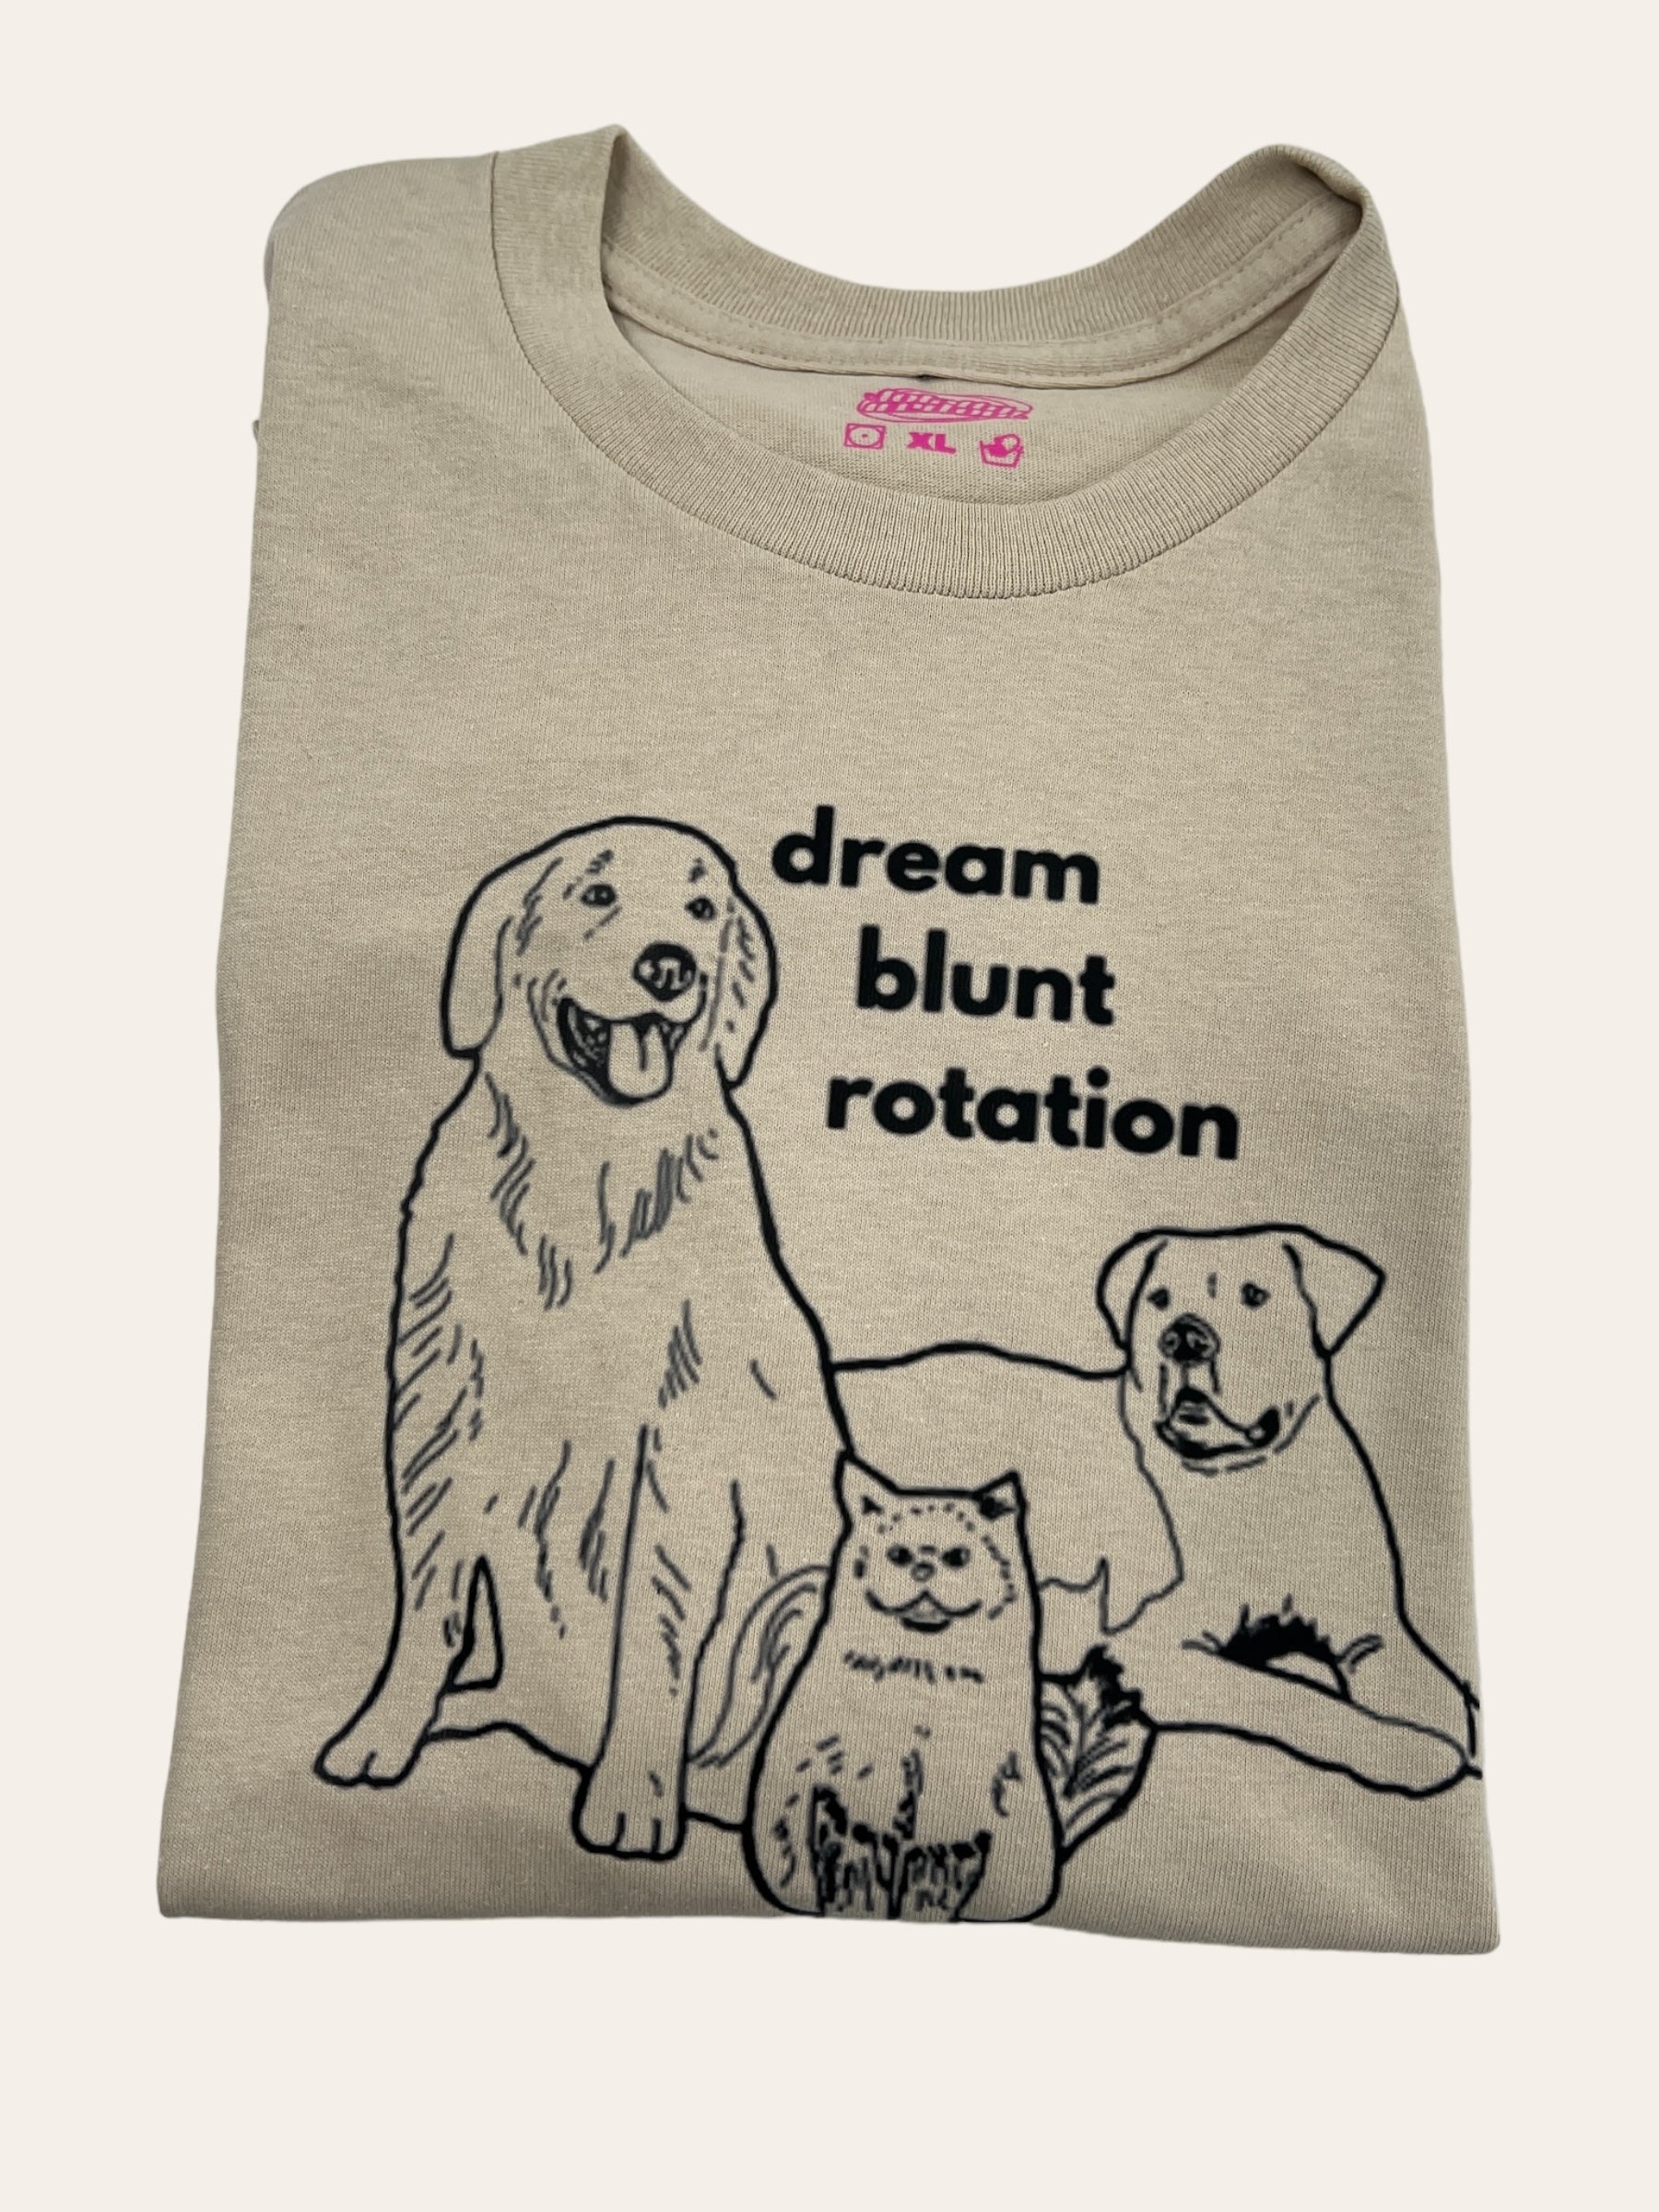 a t - shirt with a drawing of two dogs and a cat